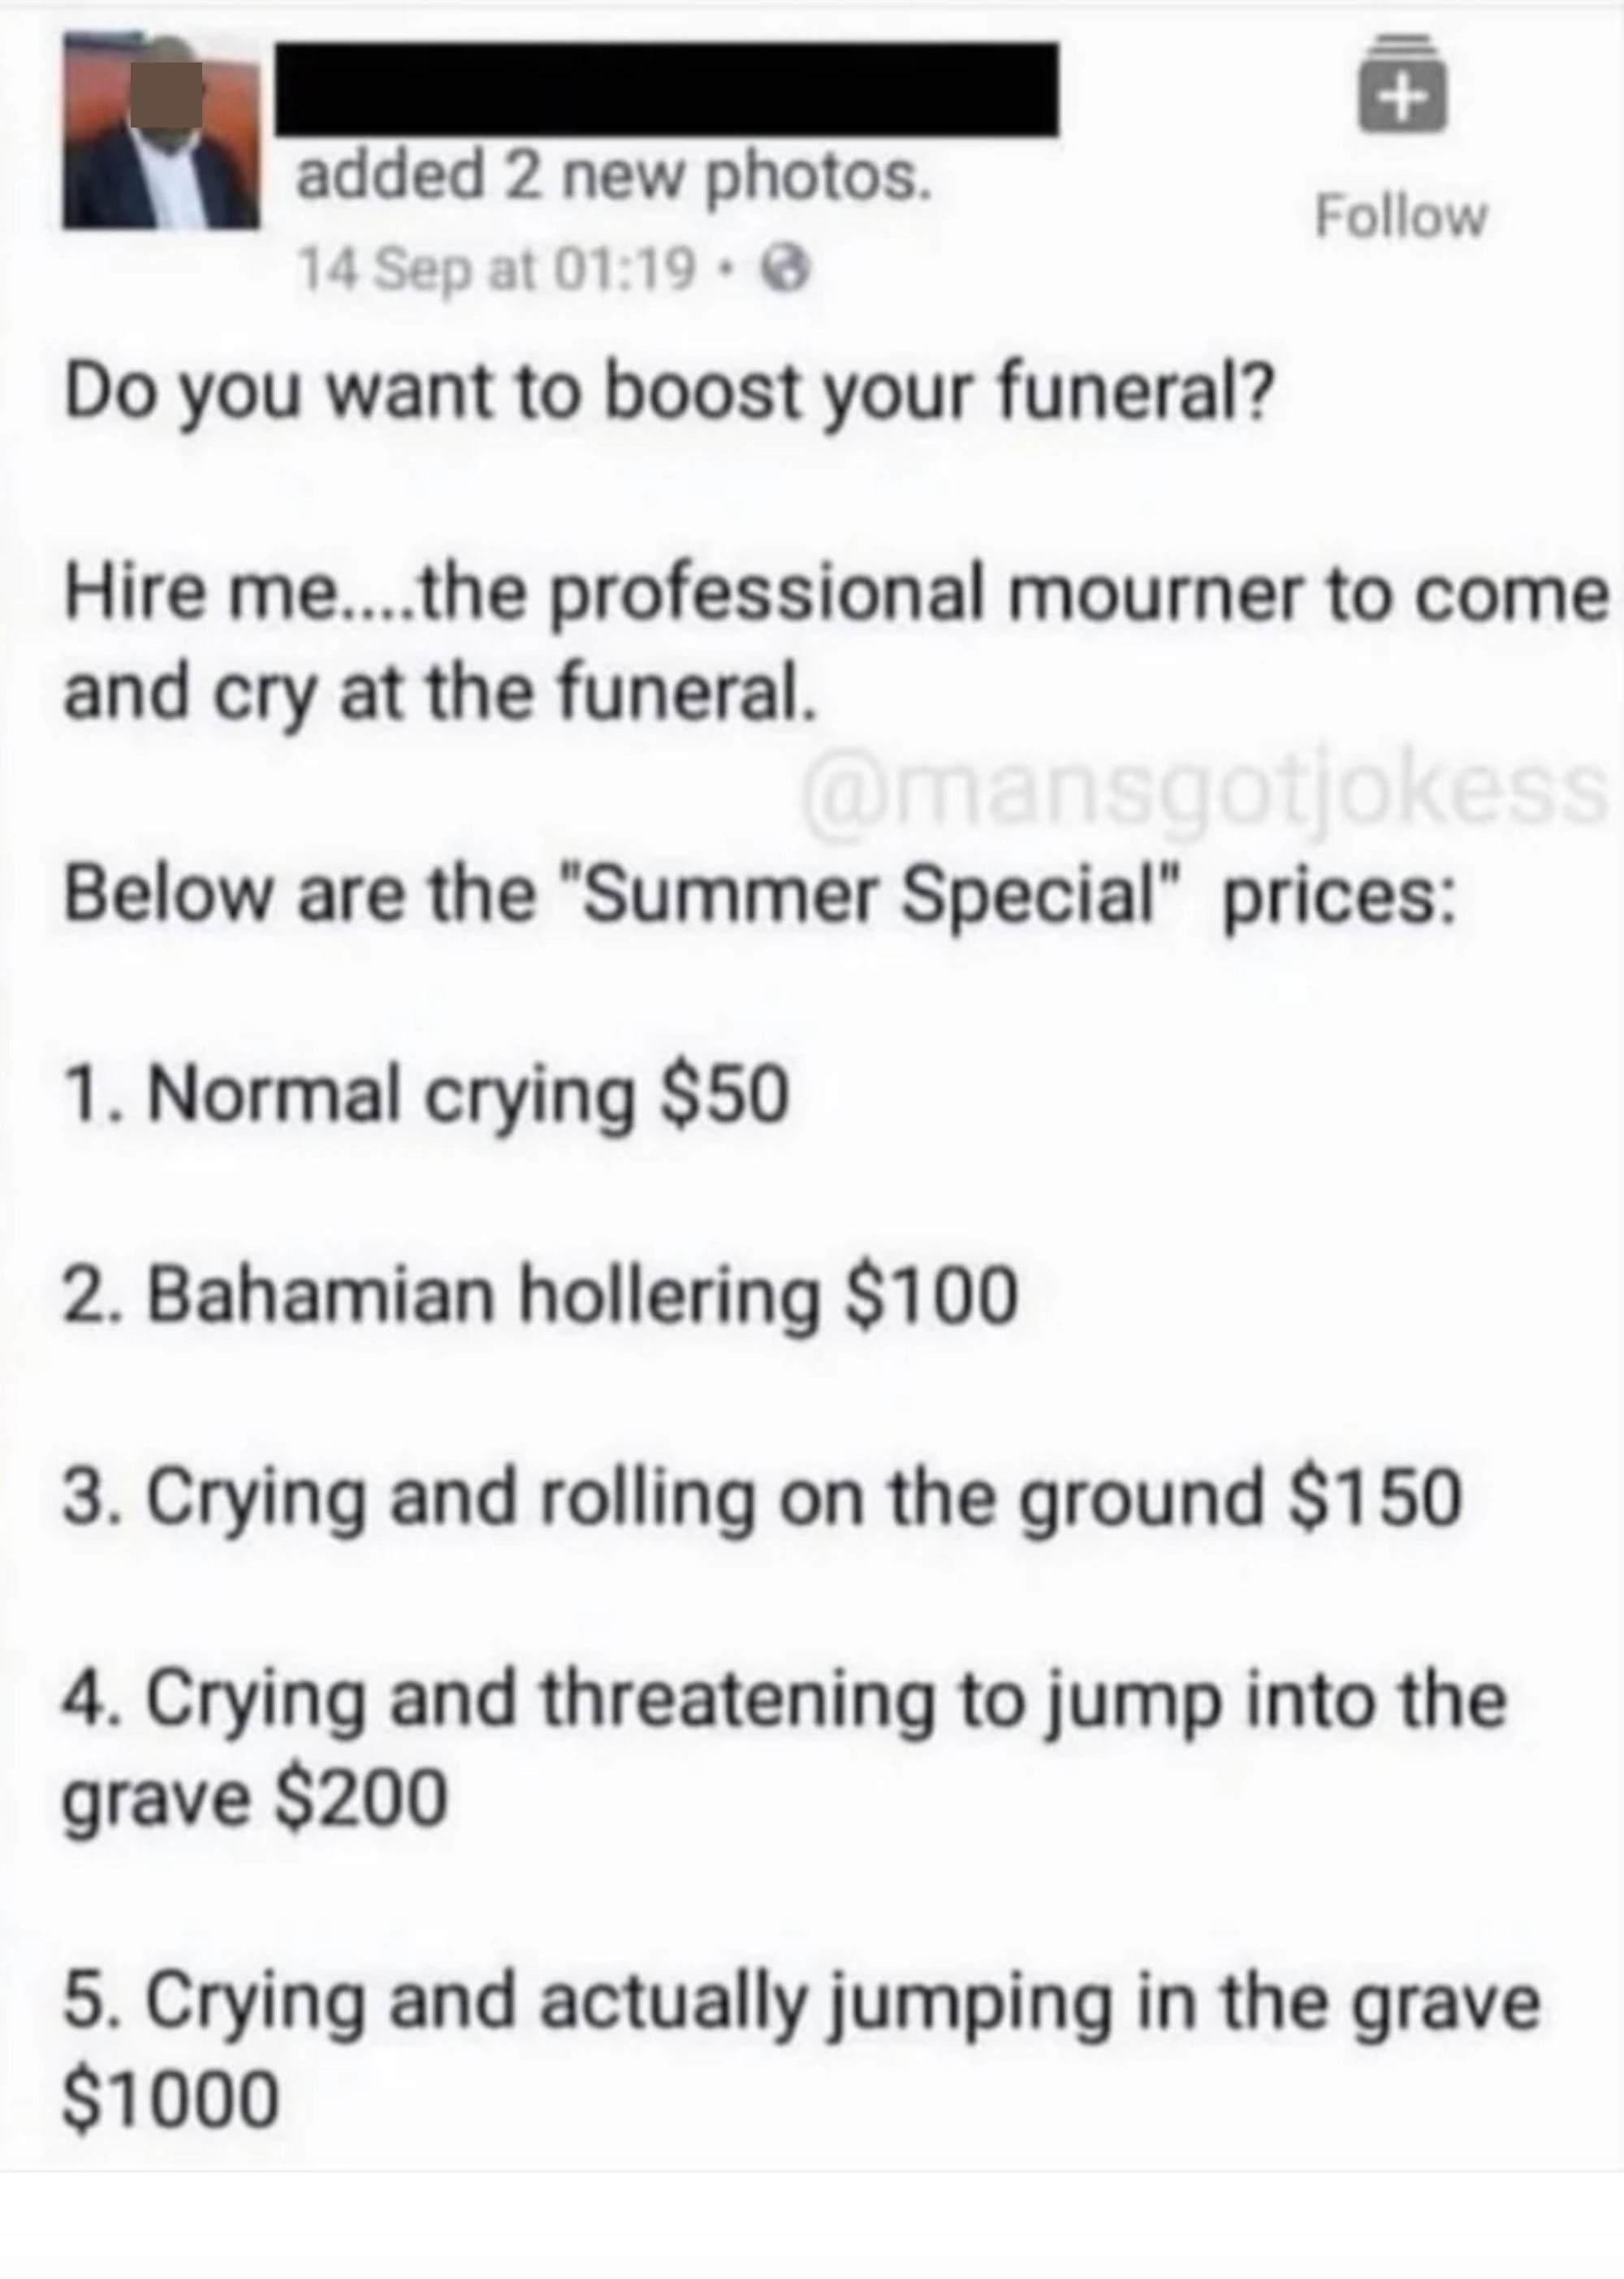 A professional mourner listing an ad for their services